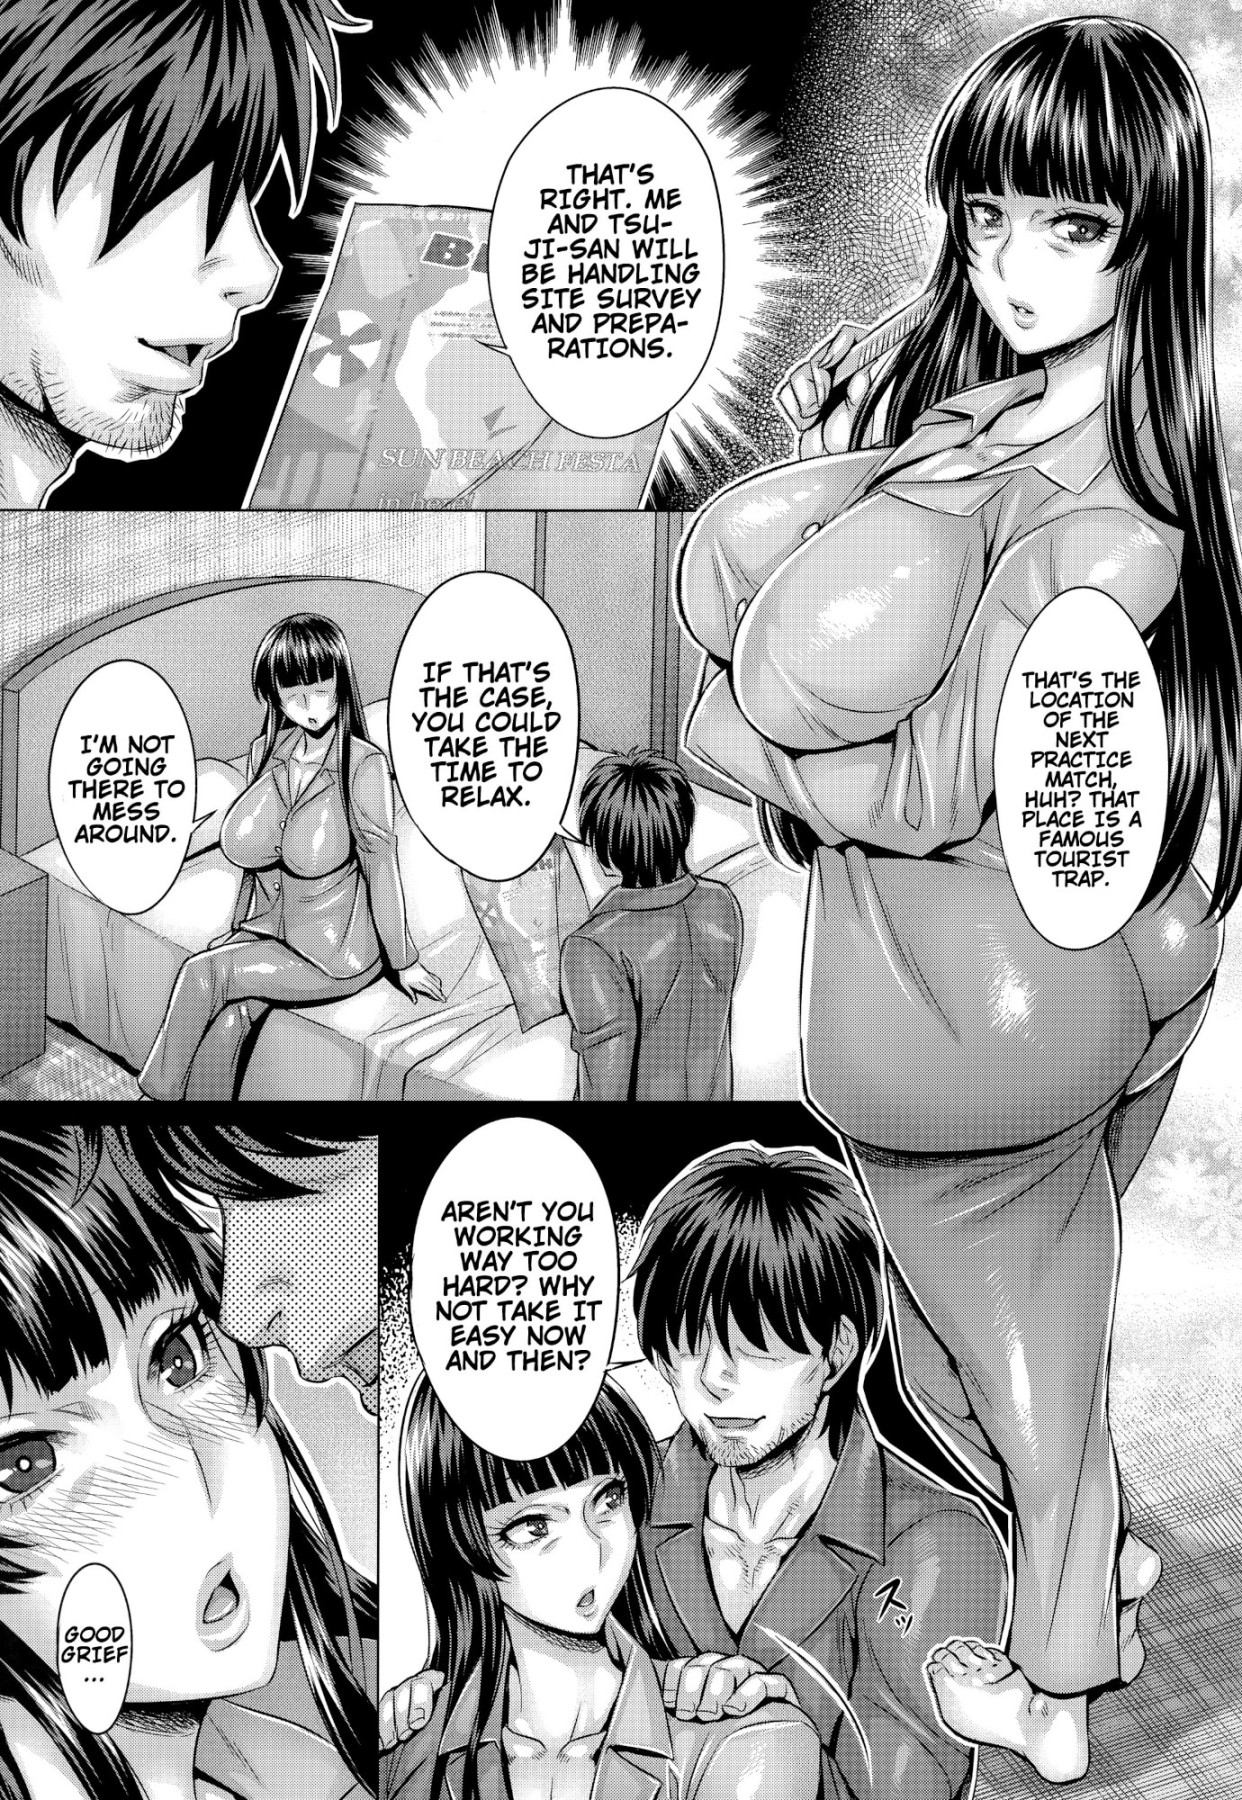 Hentai Manga Comic-Records Of The Perverted Fall Of The Forced Mind Controlled Family Head-Read-2